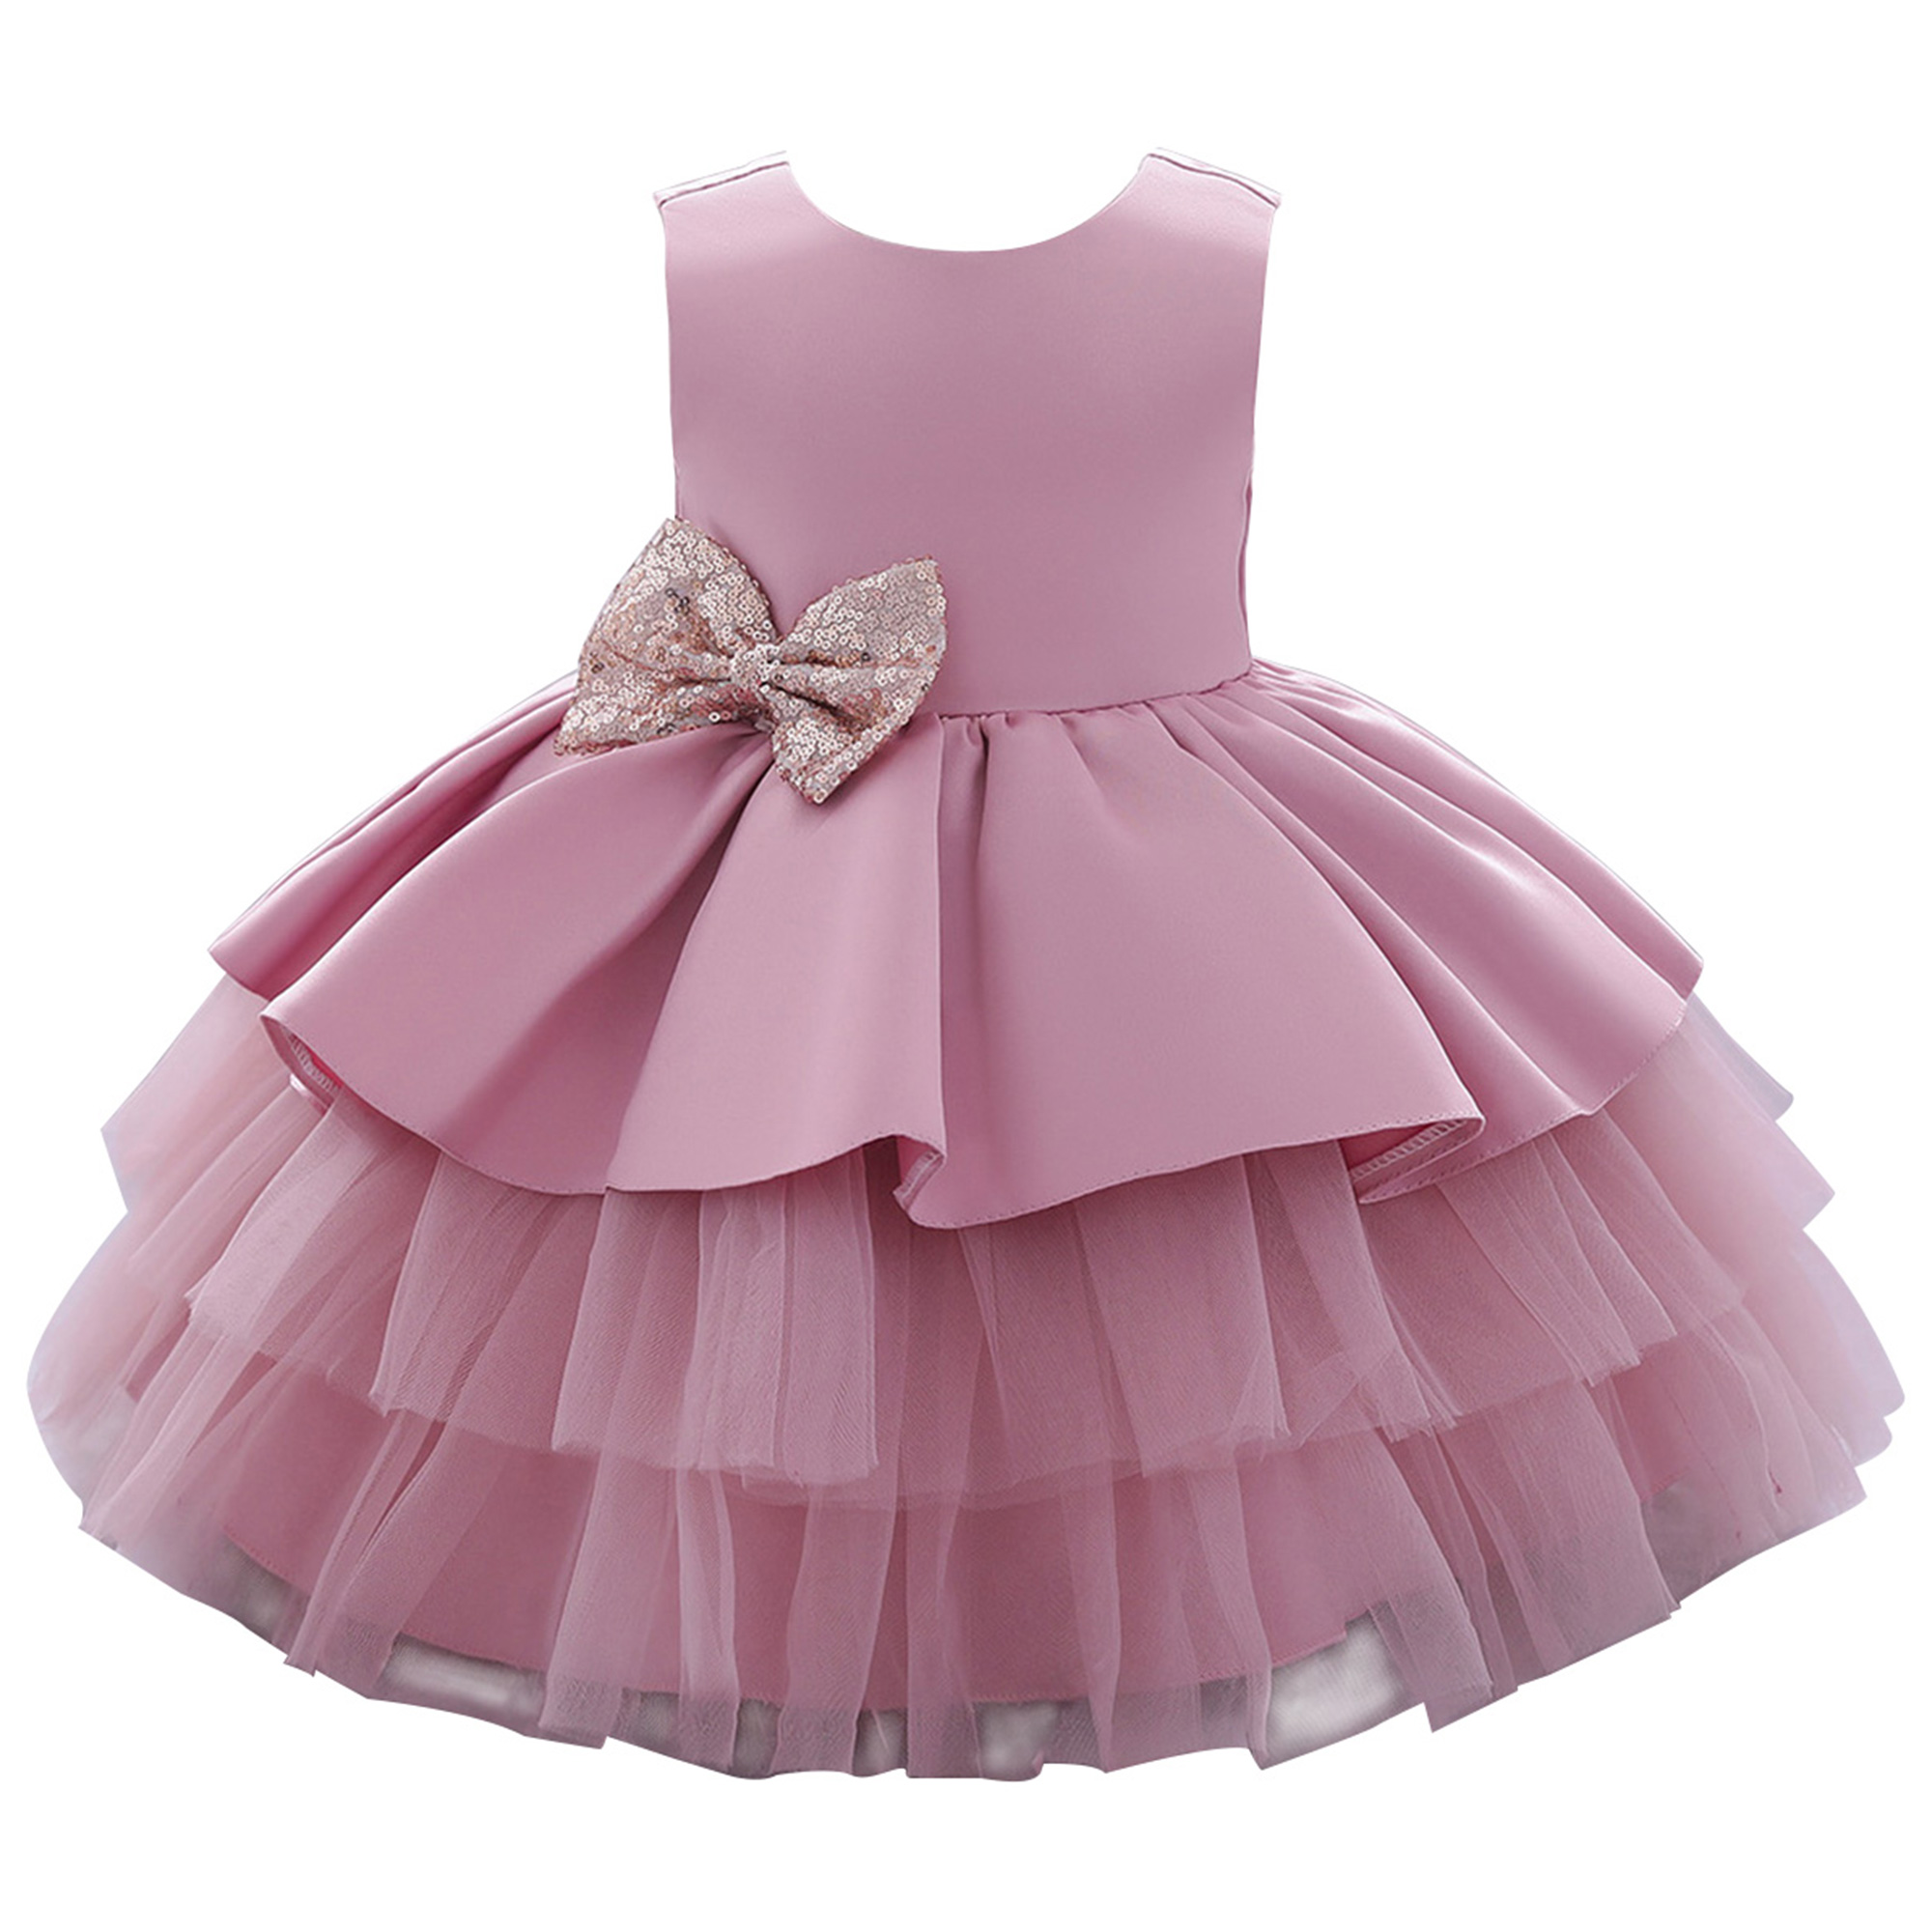 Bow Dream Baby Flower Girl Dresses Lace Bowknot Wedding Pageant Formal Tutu Gown 